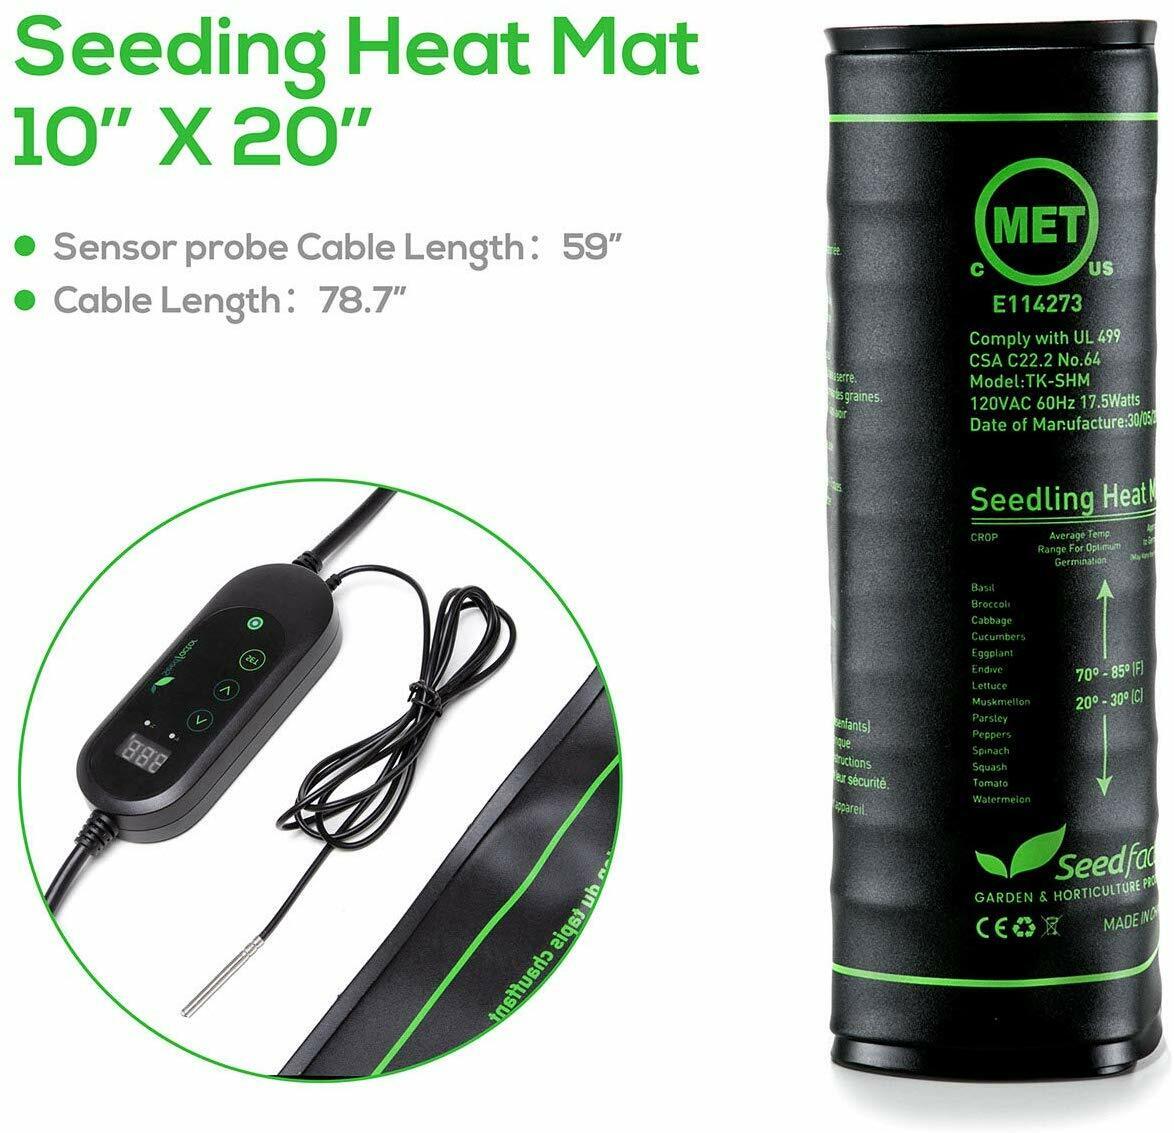 Digital Seedling Heat Mat Seed Starting Thermostat Controller for Seed Cloning